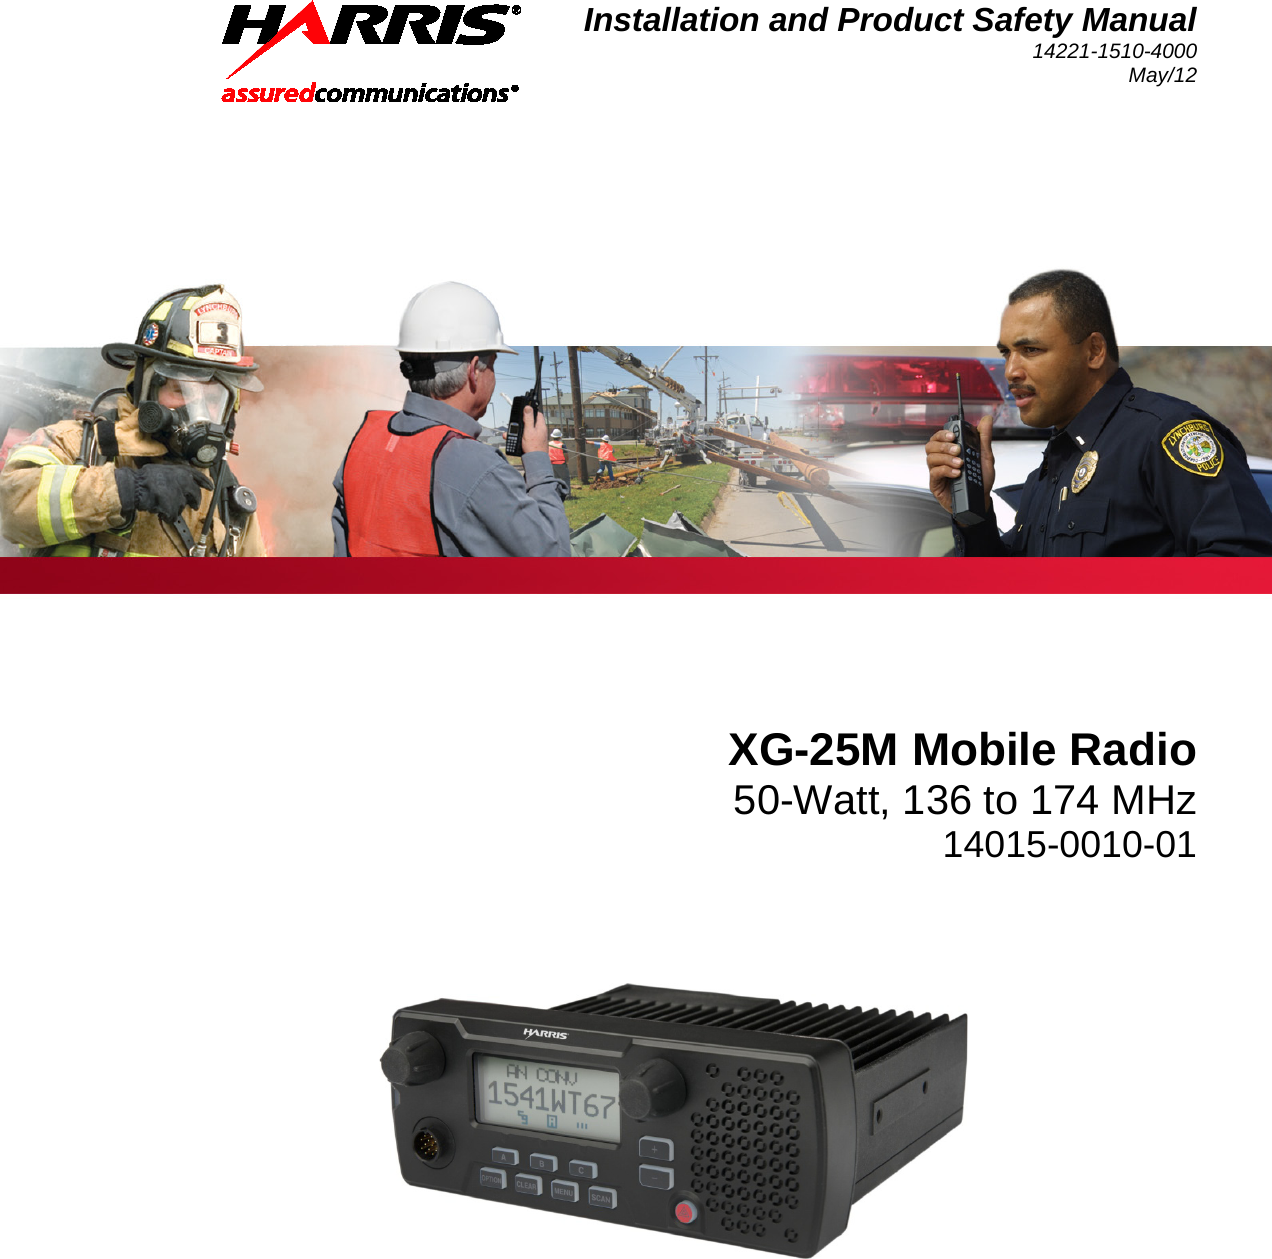 Installation and Product Safety Manual 14221-1510-4000 May/12   XG-25M Mobile Radio 50-Watt, 136 to 174 MHz 14015-0010-01  